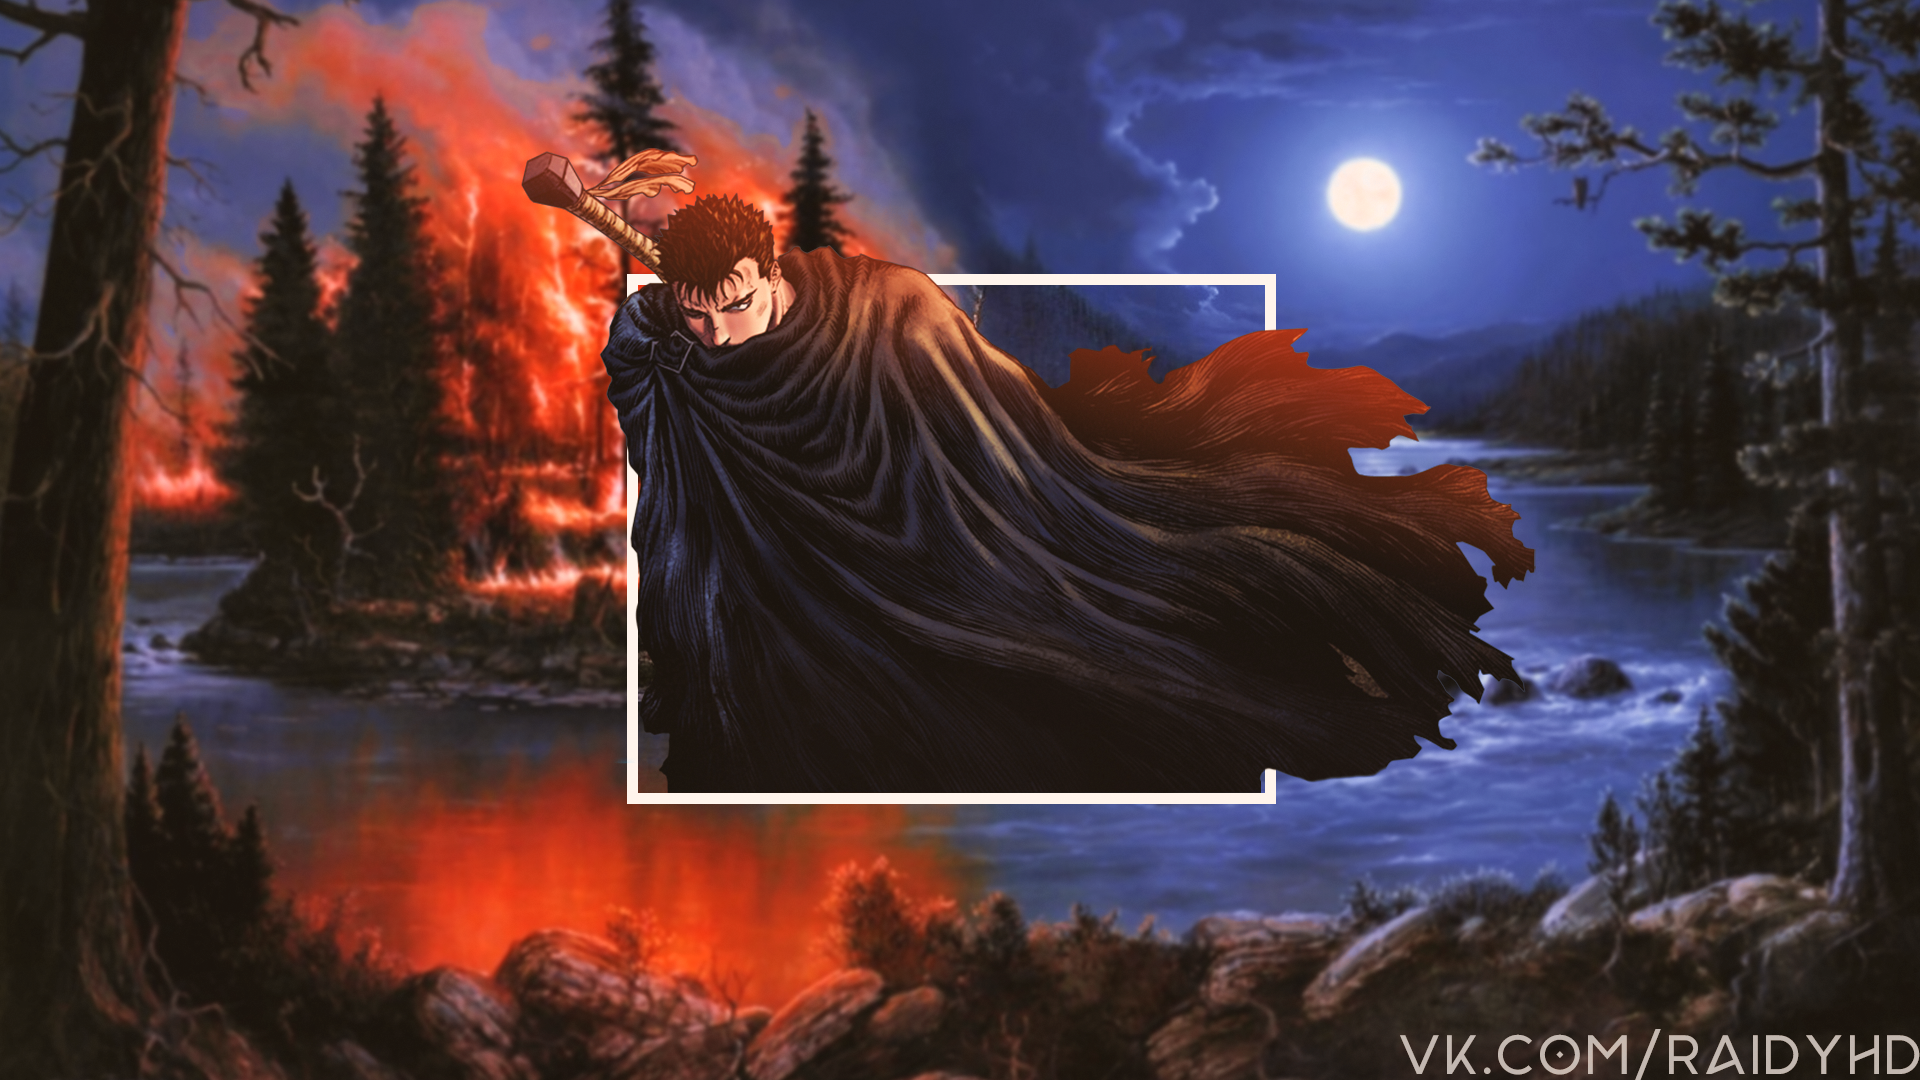 Anime 1920x1080 anime anime boys picture-in-picture Guts Berserk watermarked